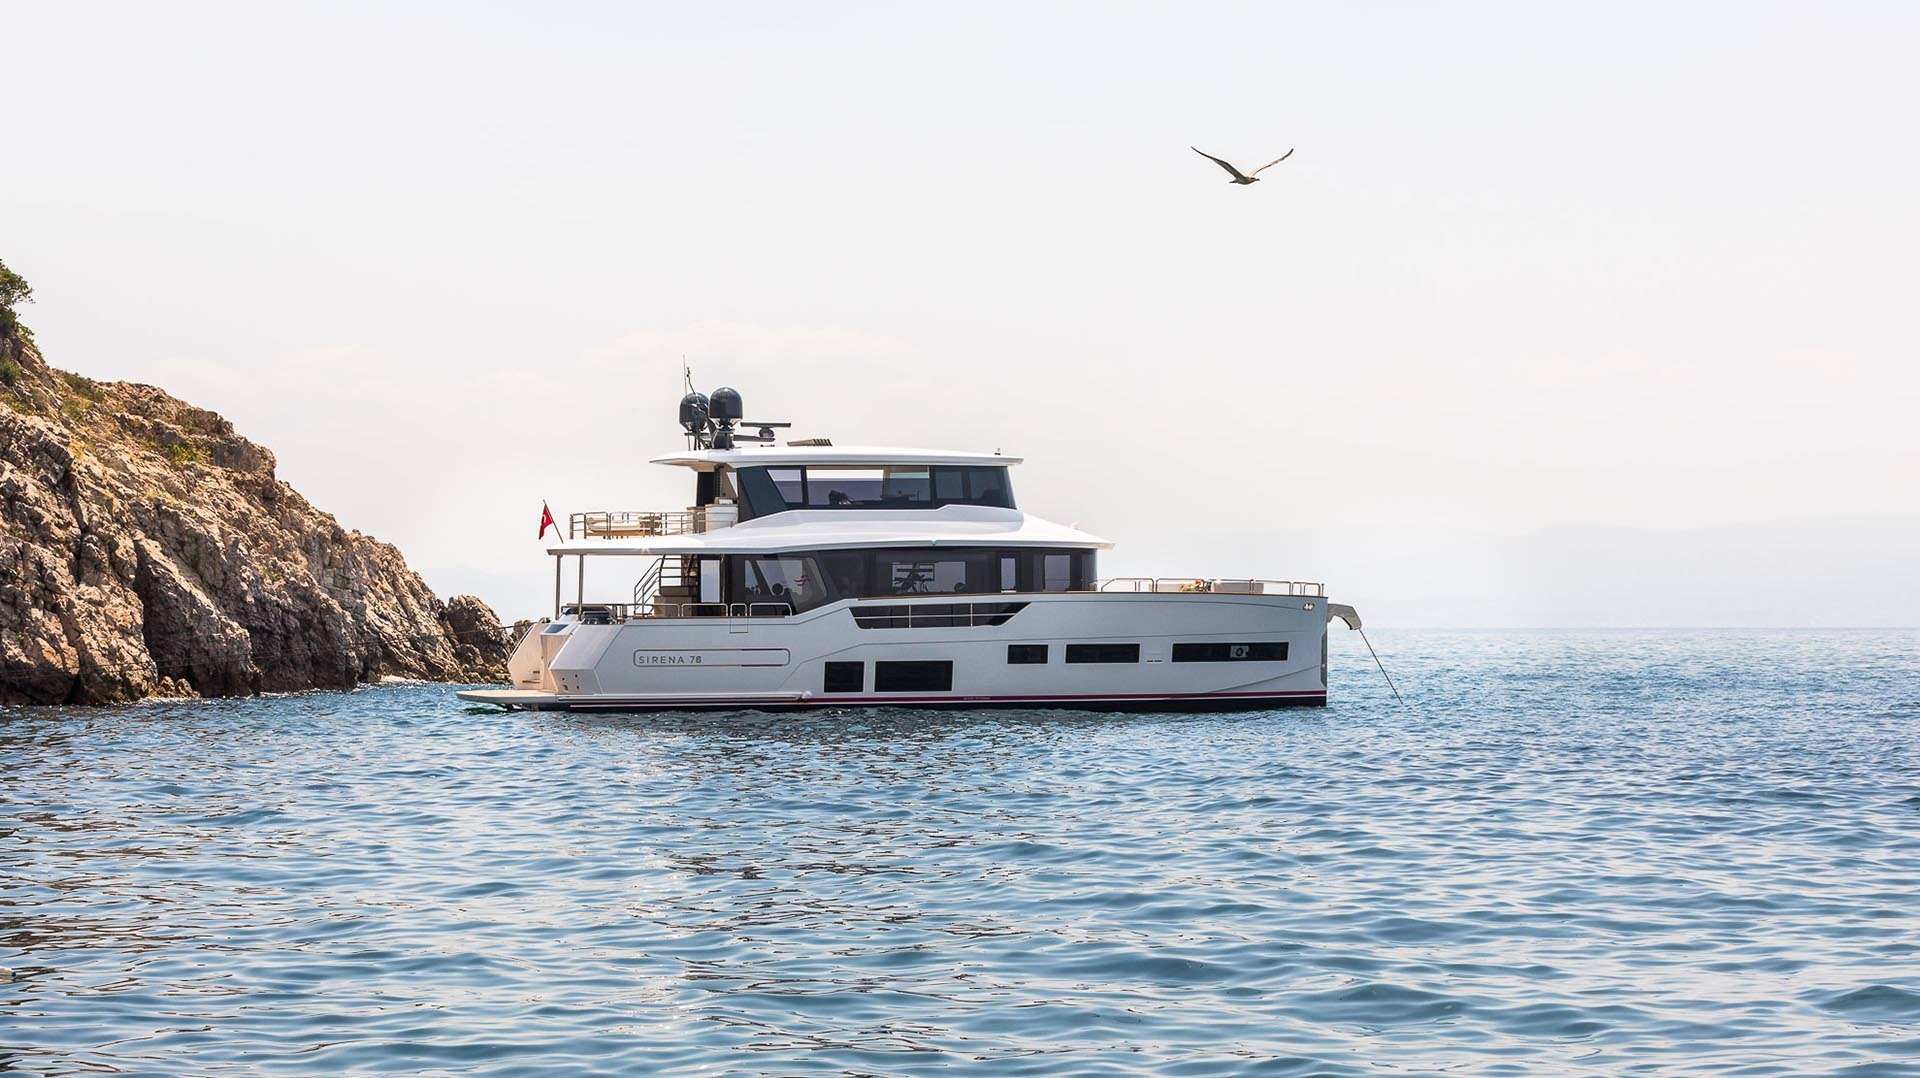 360 VR Virtual Tours of the Sirena 78